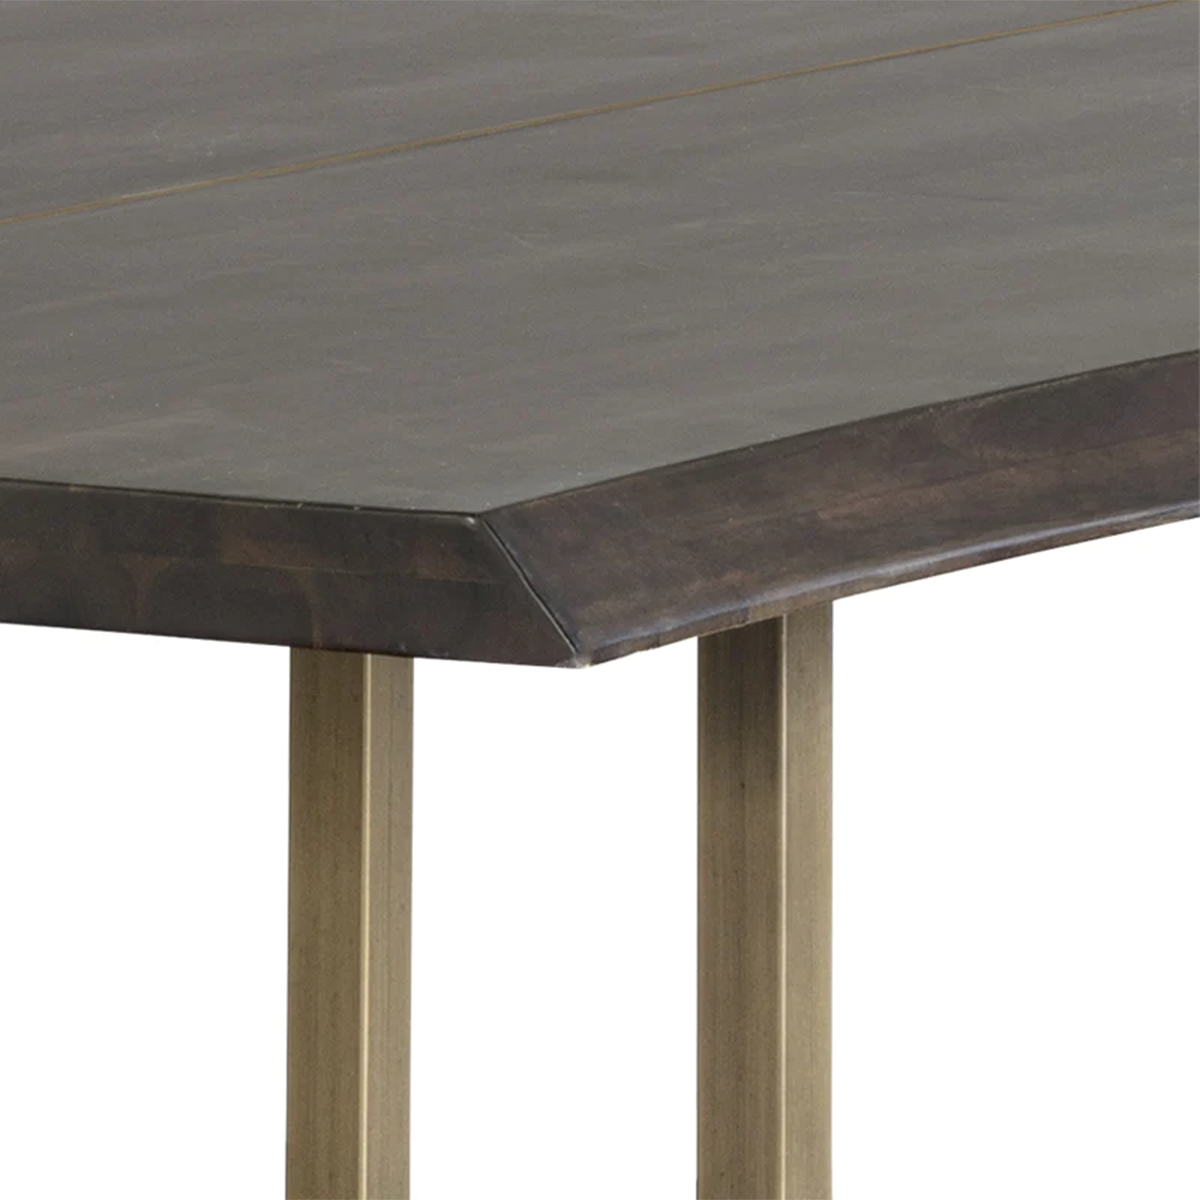 Donnelly Dining Table Close Image of The Material 2